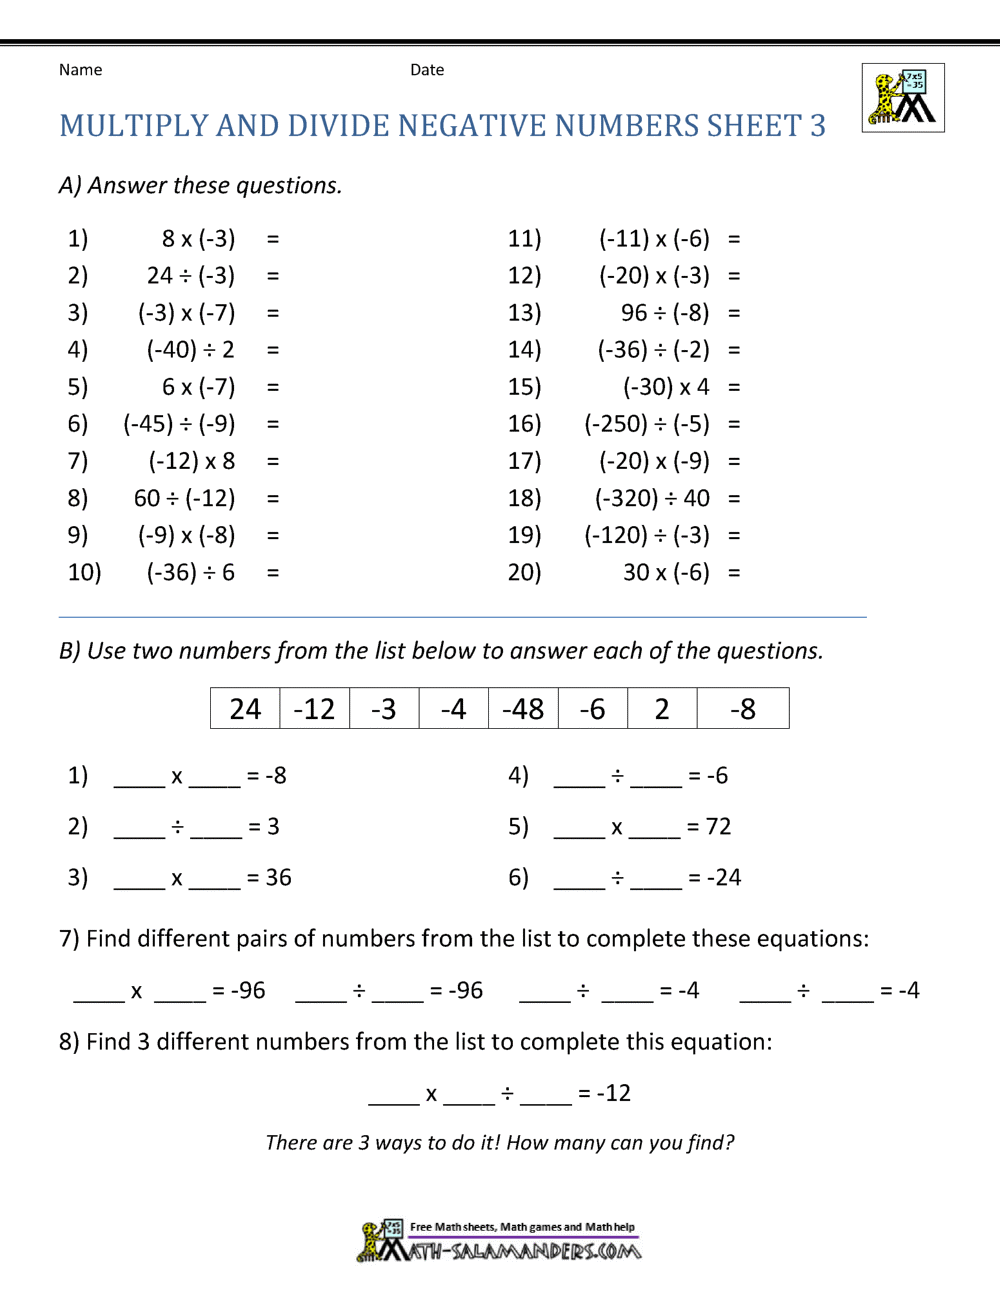 Multiply and Divide Negative Numbers Regarding Multiplying Negative Numbers Worksheet